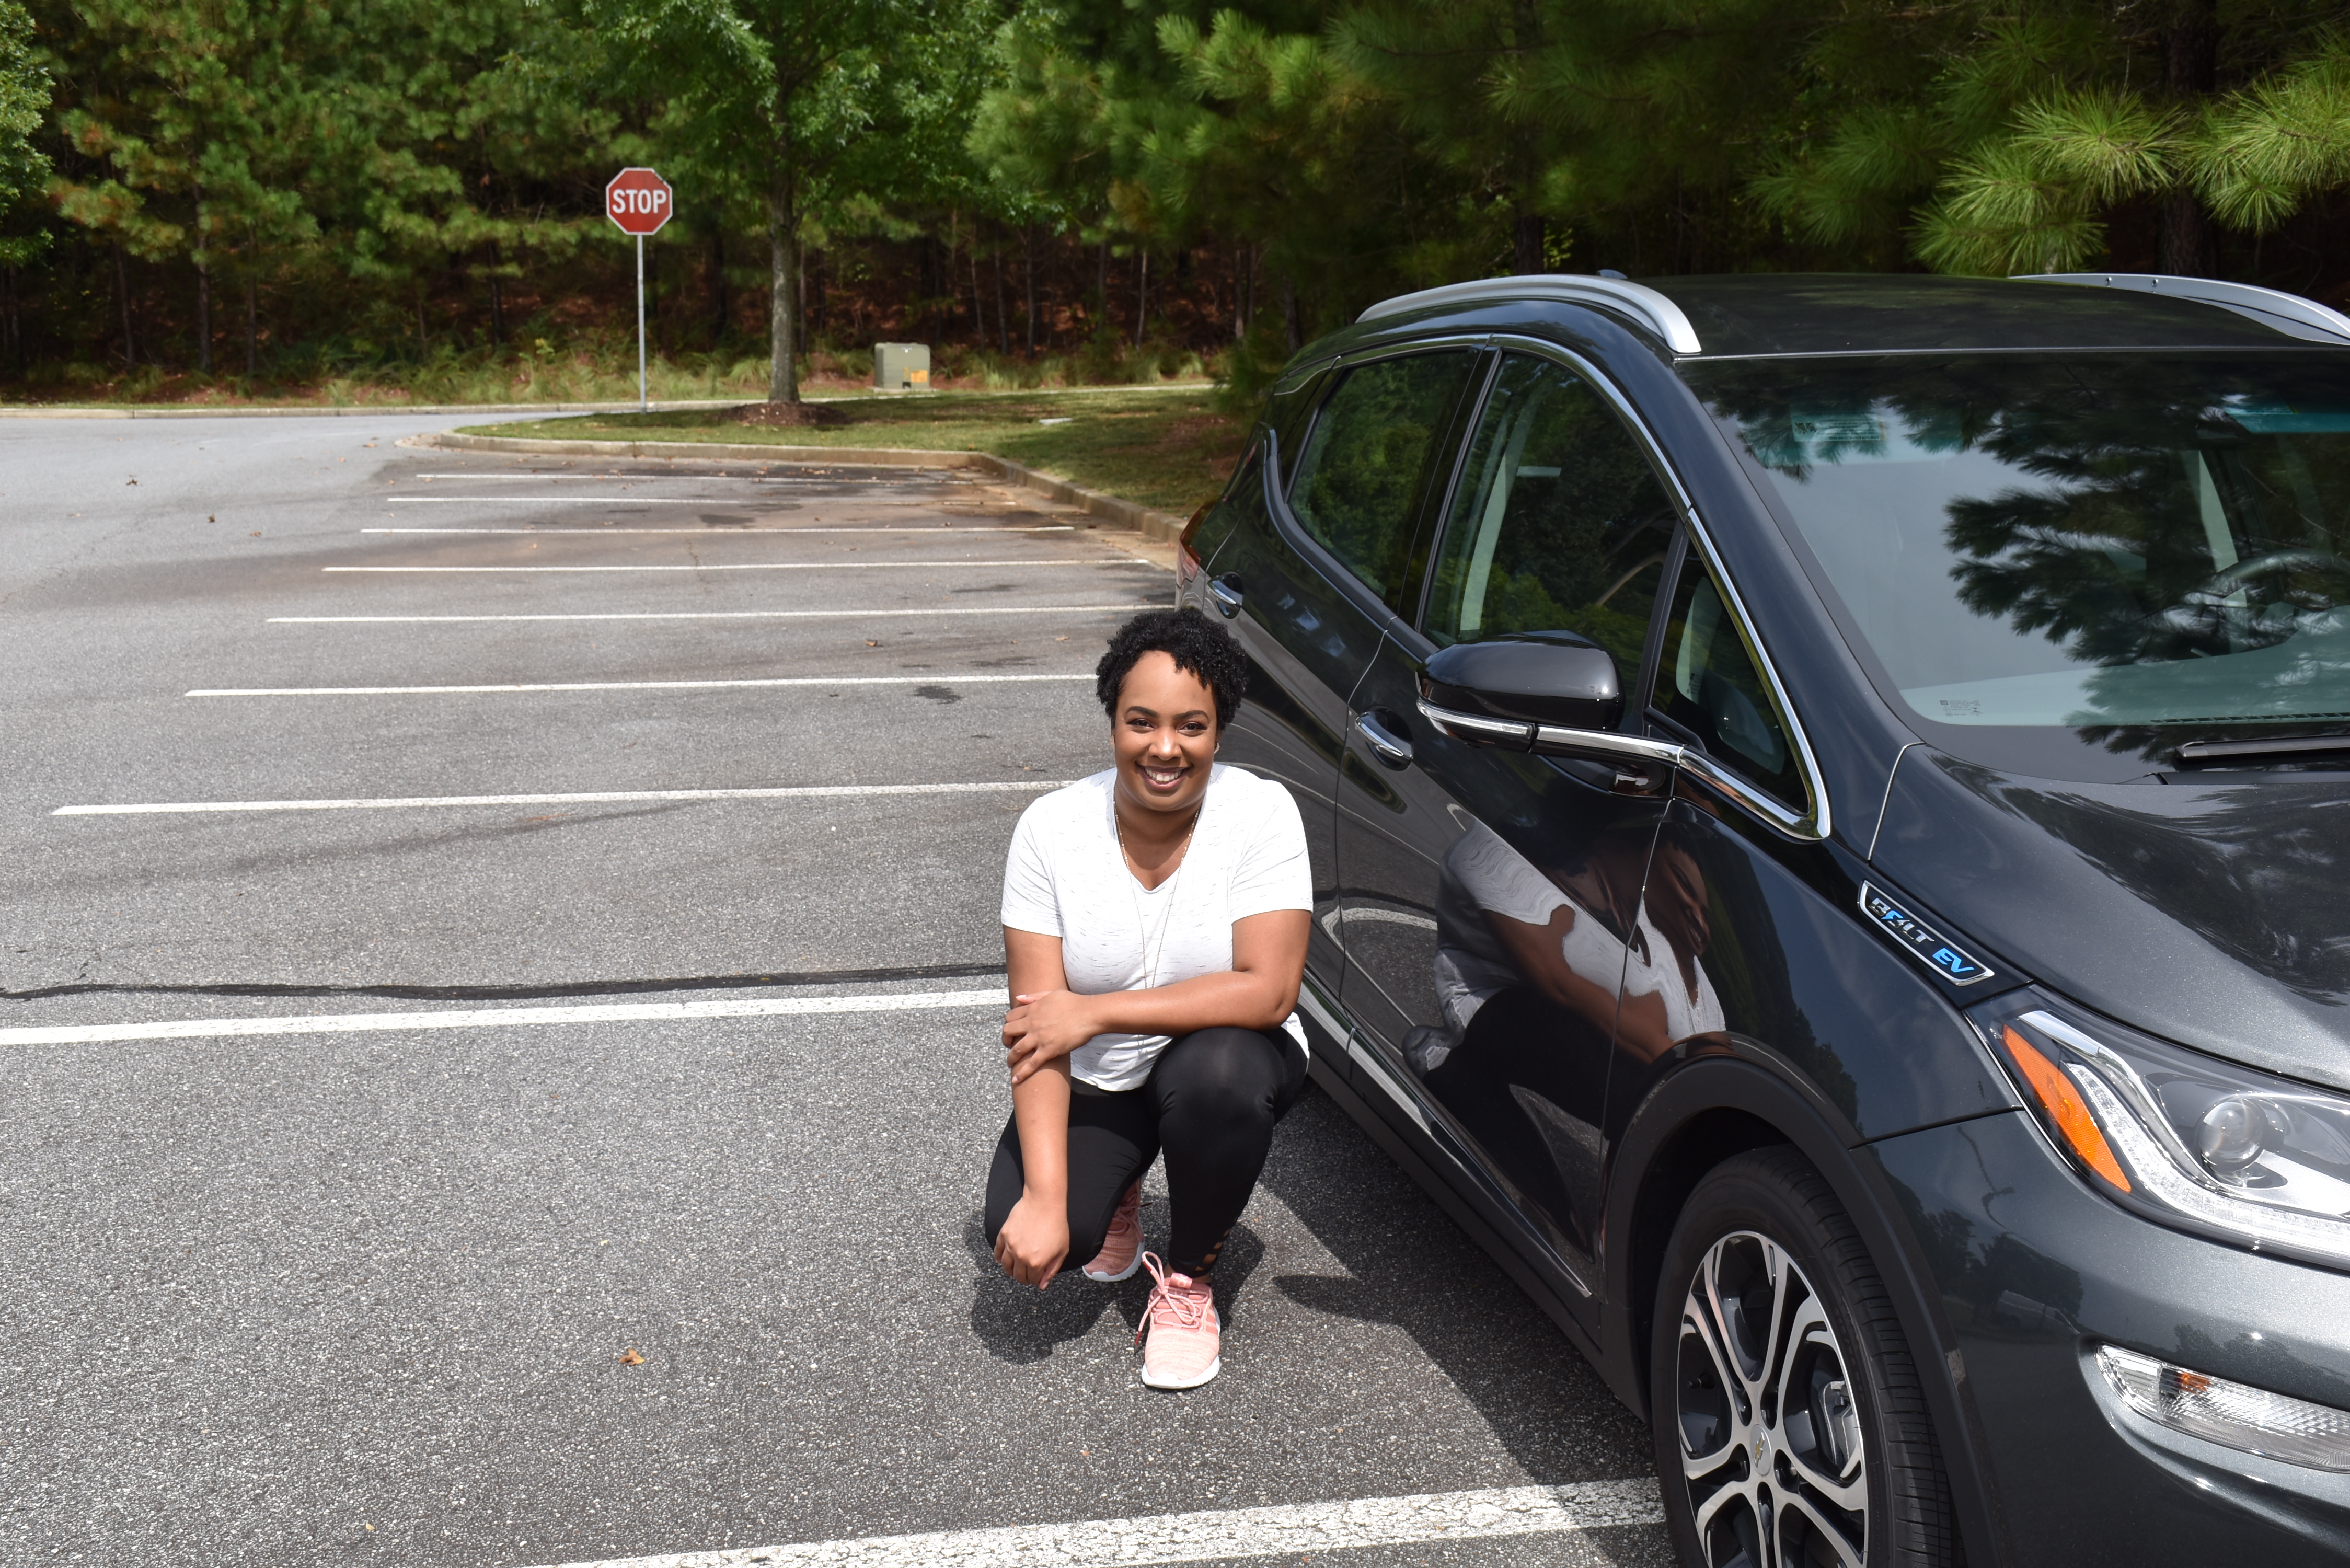 My First Driving Experience with an All-Electric Car: 2020 Chevy Bolt EV Review